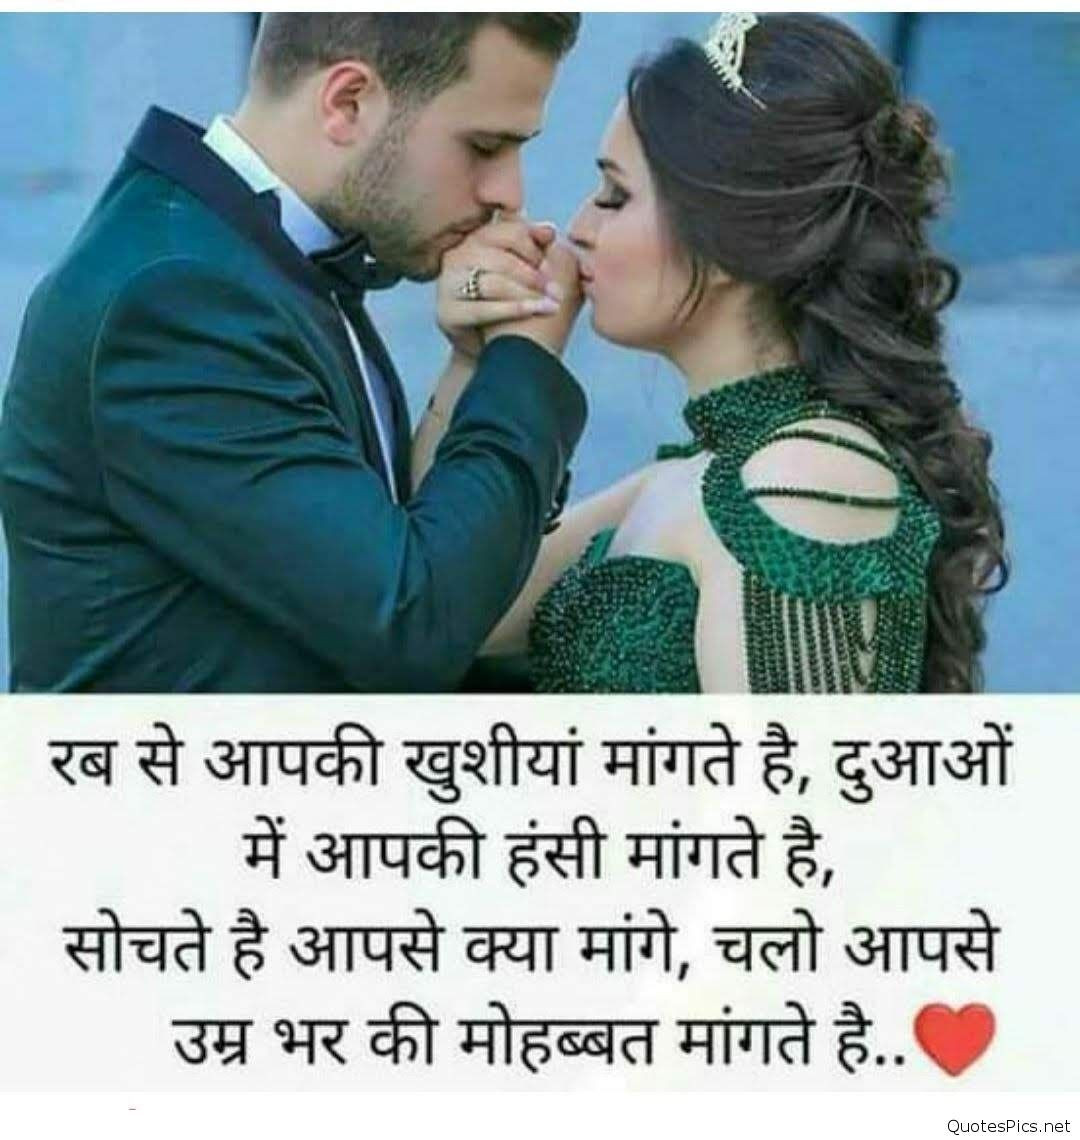 Romantic Quotes In Hindi
 Love Image With Quotes In Hindi